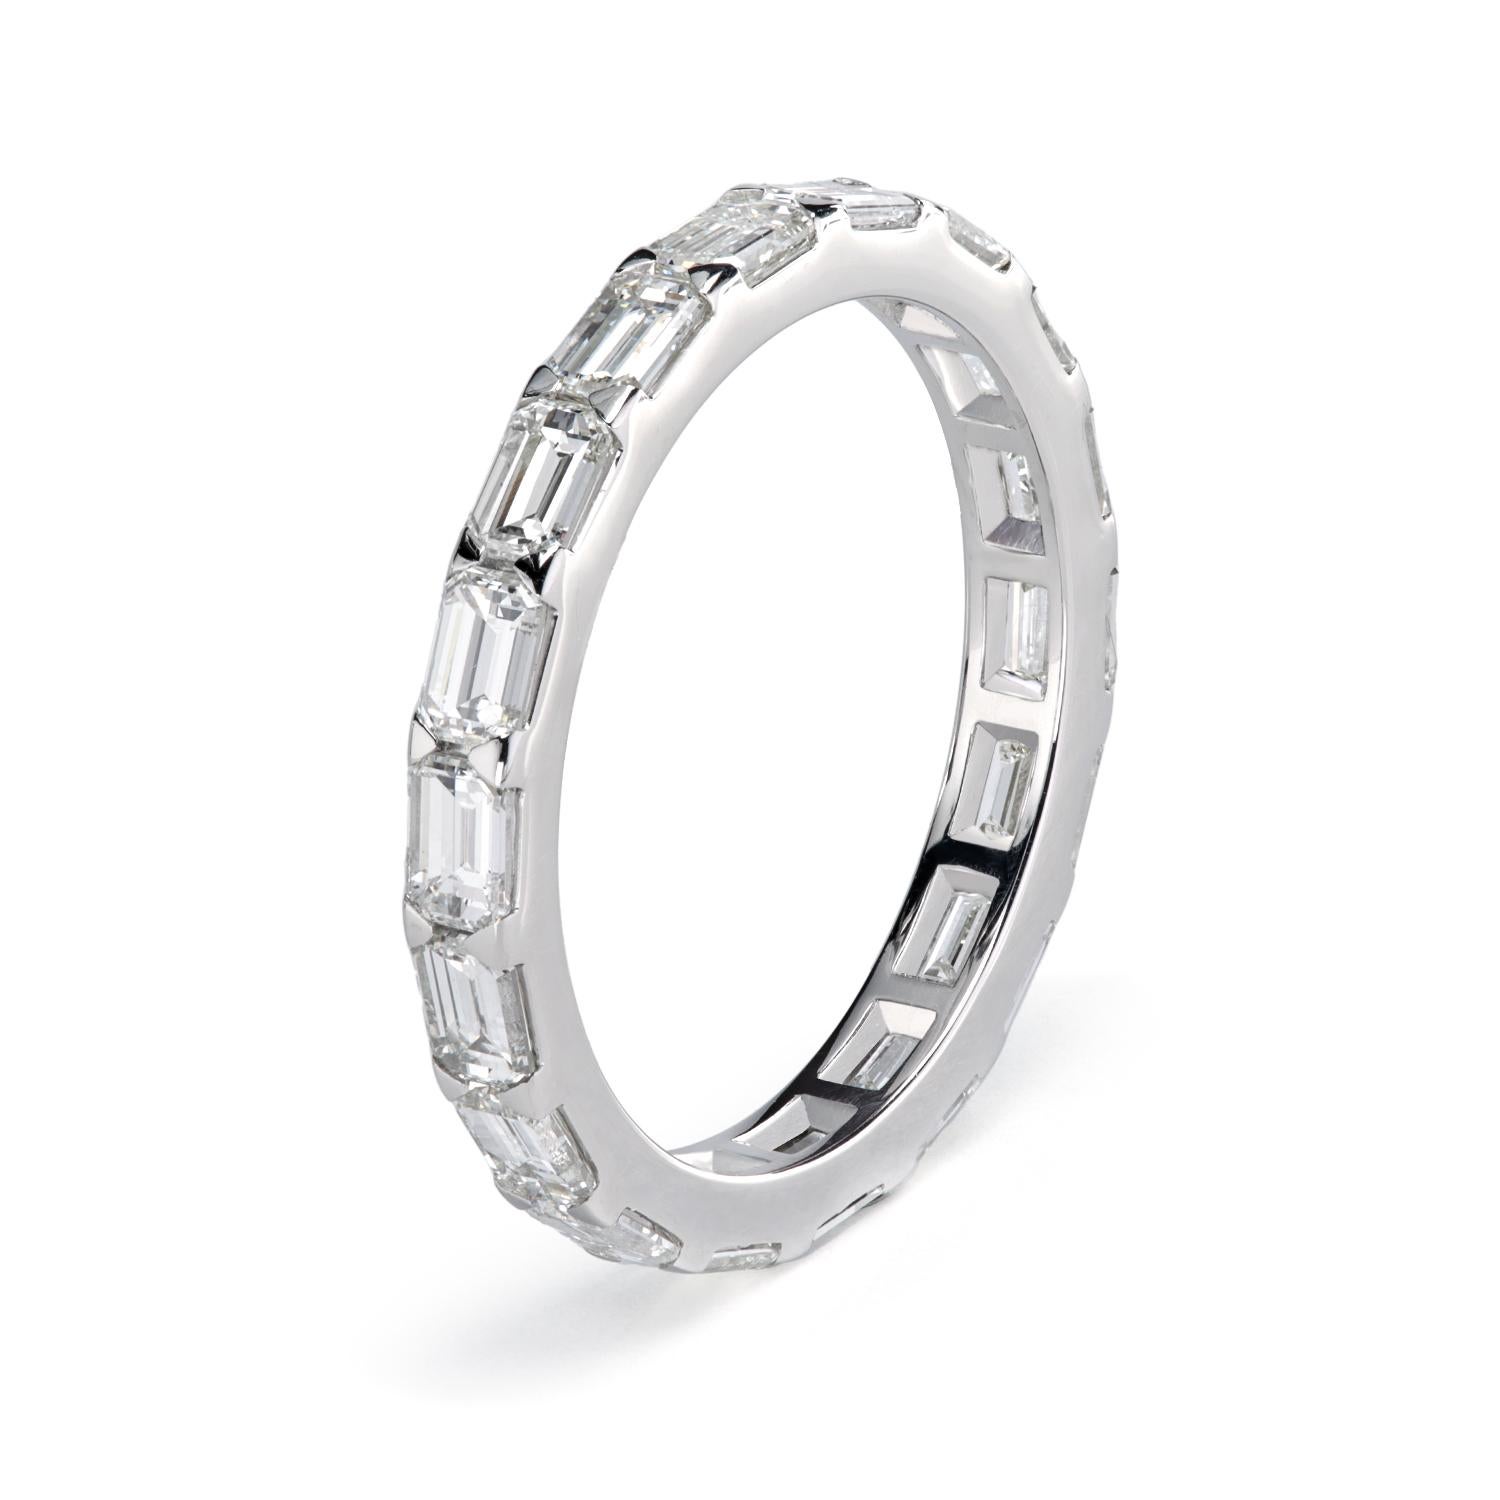 Leon Mege vaunted Hamptons™ platinum eternity band set East-West with emerald-cut diamonds. The style epitomizes the highest perfection in the field of bridal couture, where standards of quality are so high, but the standards of artistry are even